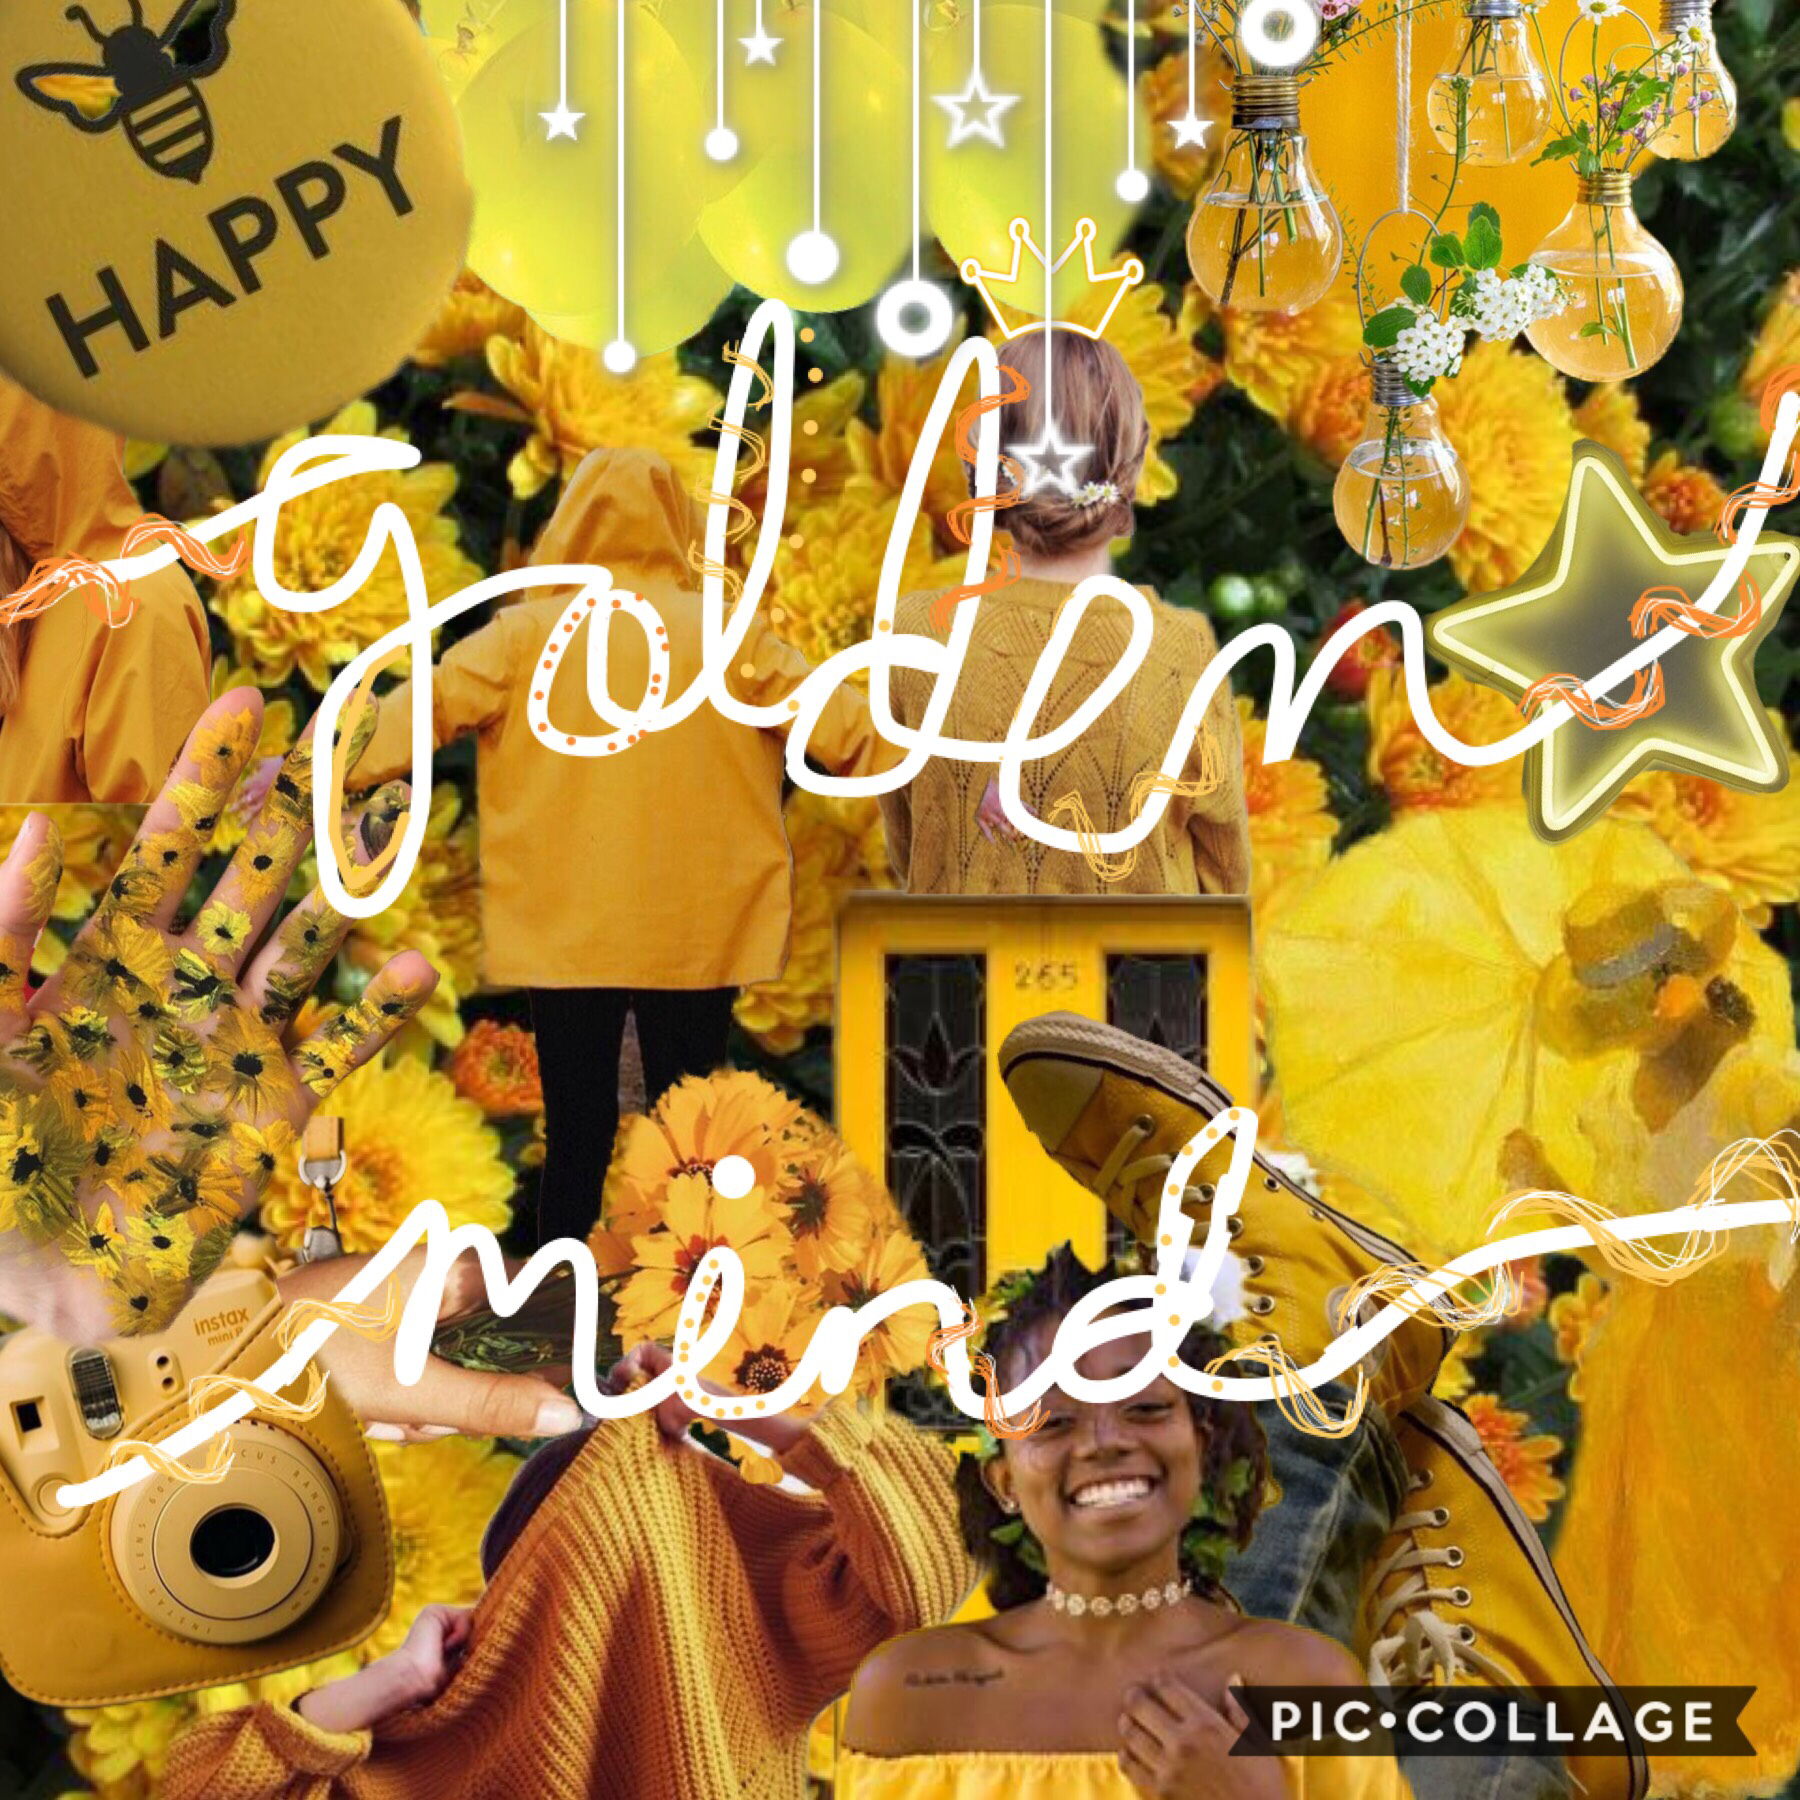 ✨tap✨
Here’s a quick edit... I love the color yellow so I created a yellow collage😊
QOTD:🦓or🦒 
AOTD:🦓
8/18/2018